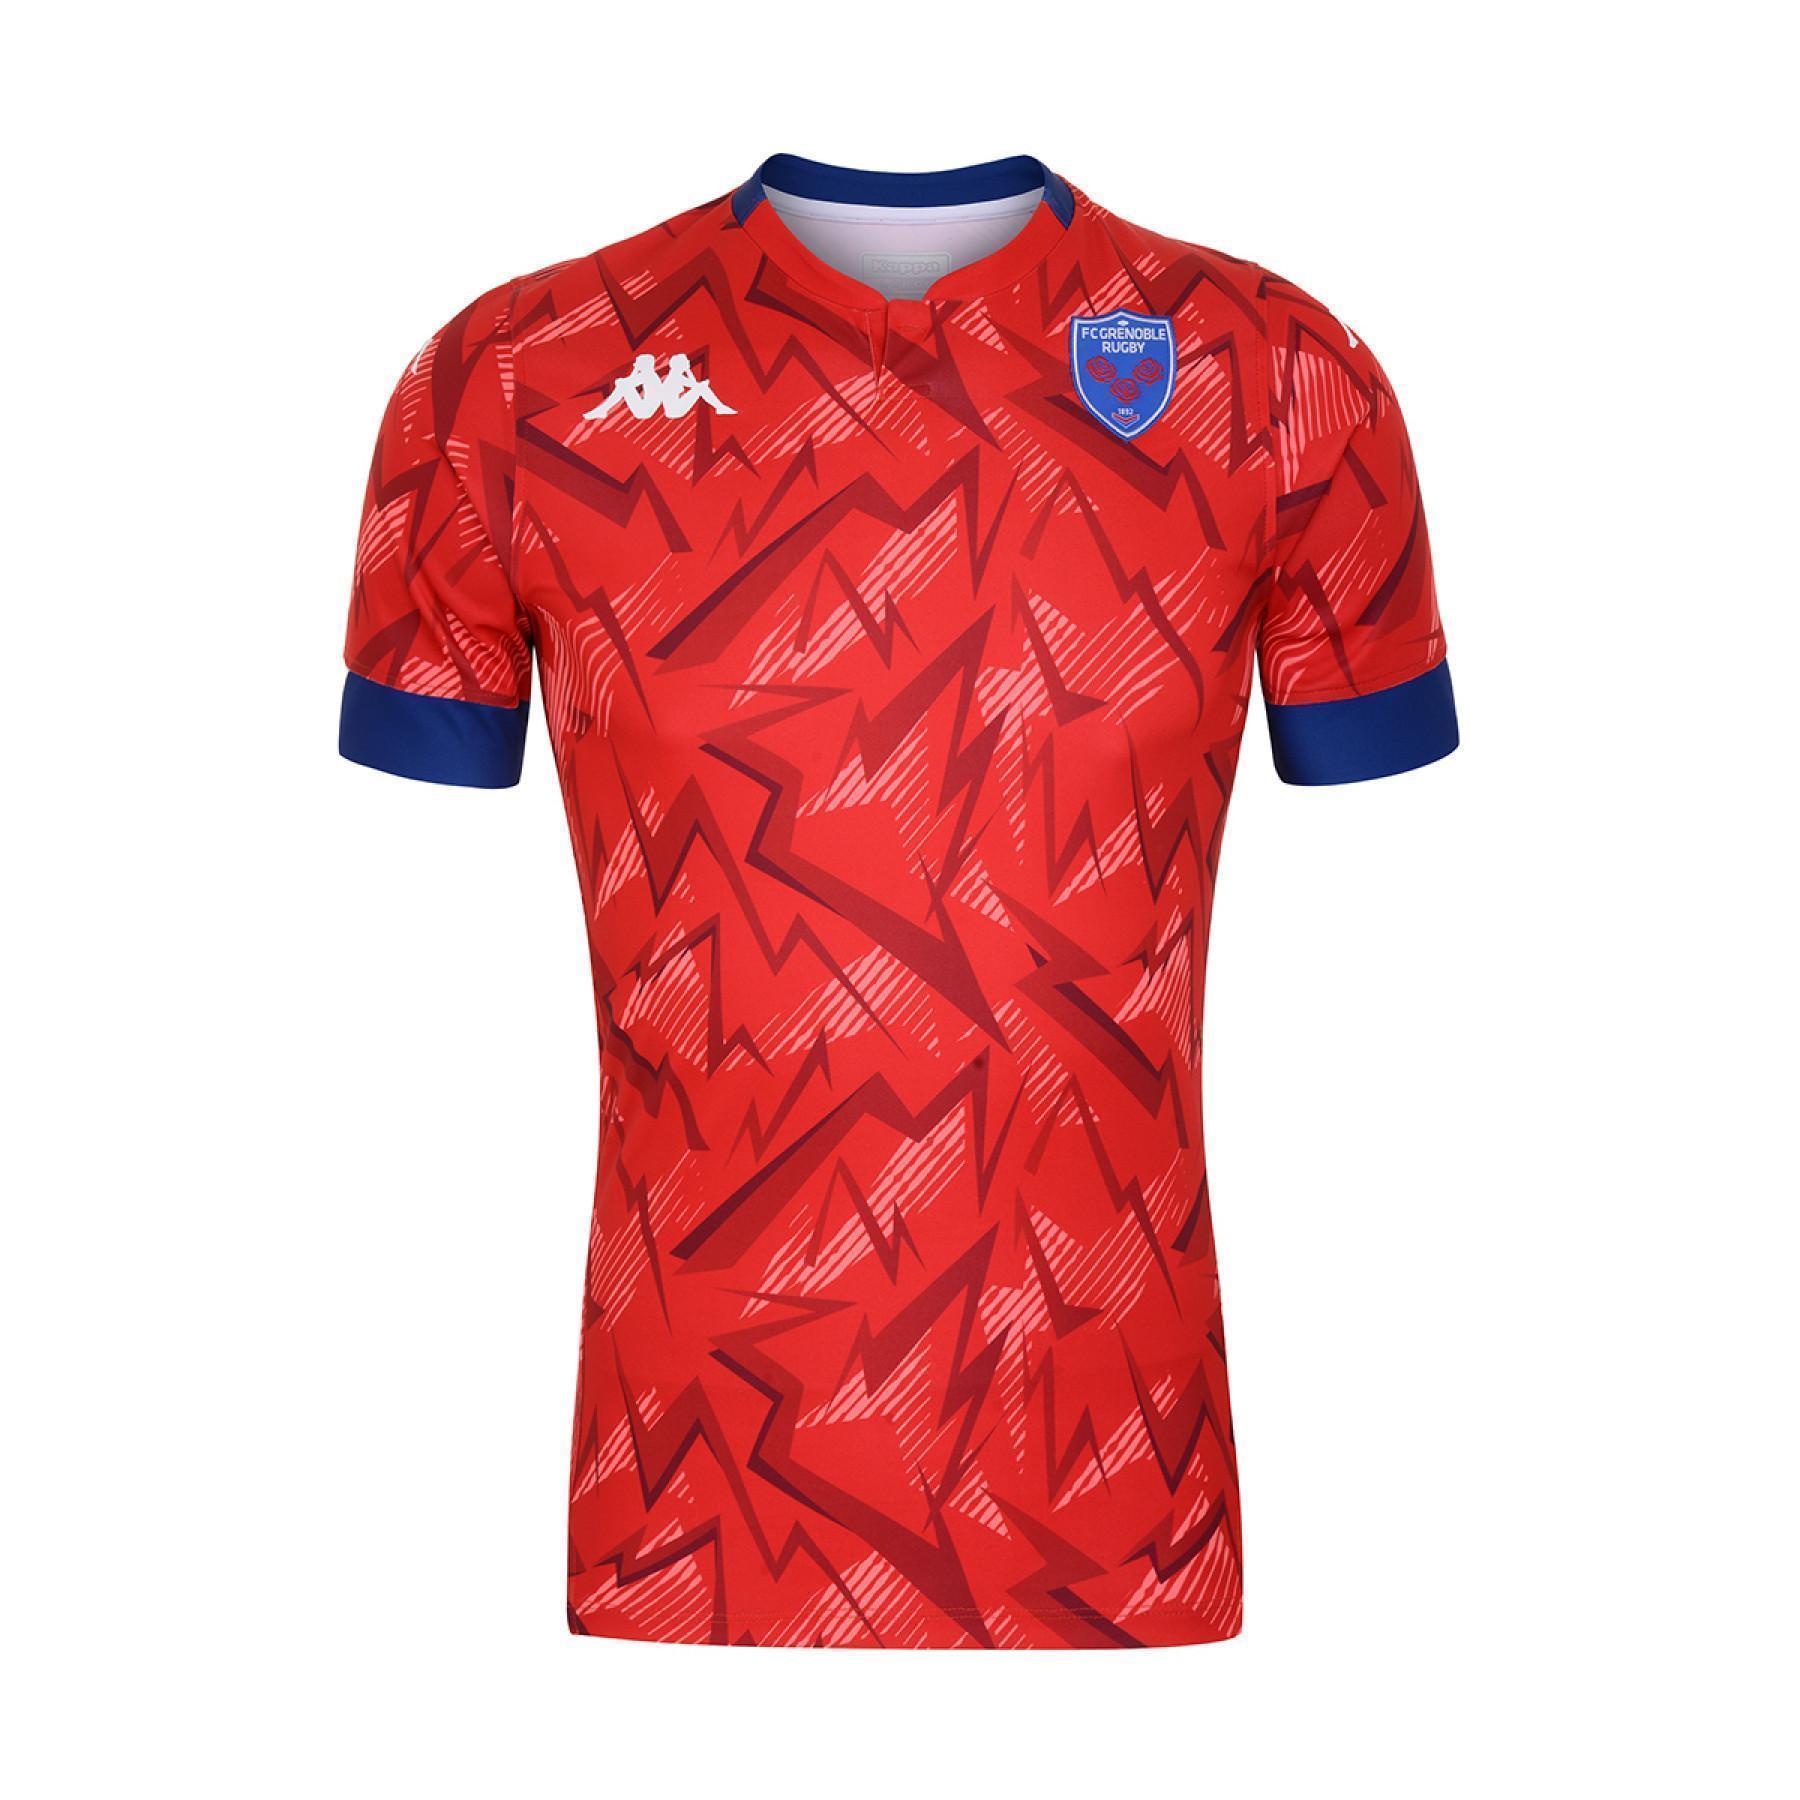 Children's outdoor jersey FC Grenoble Rugby 2020/21